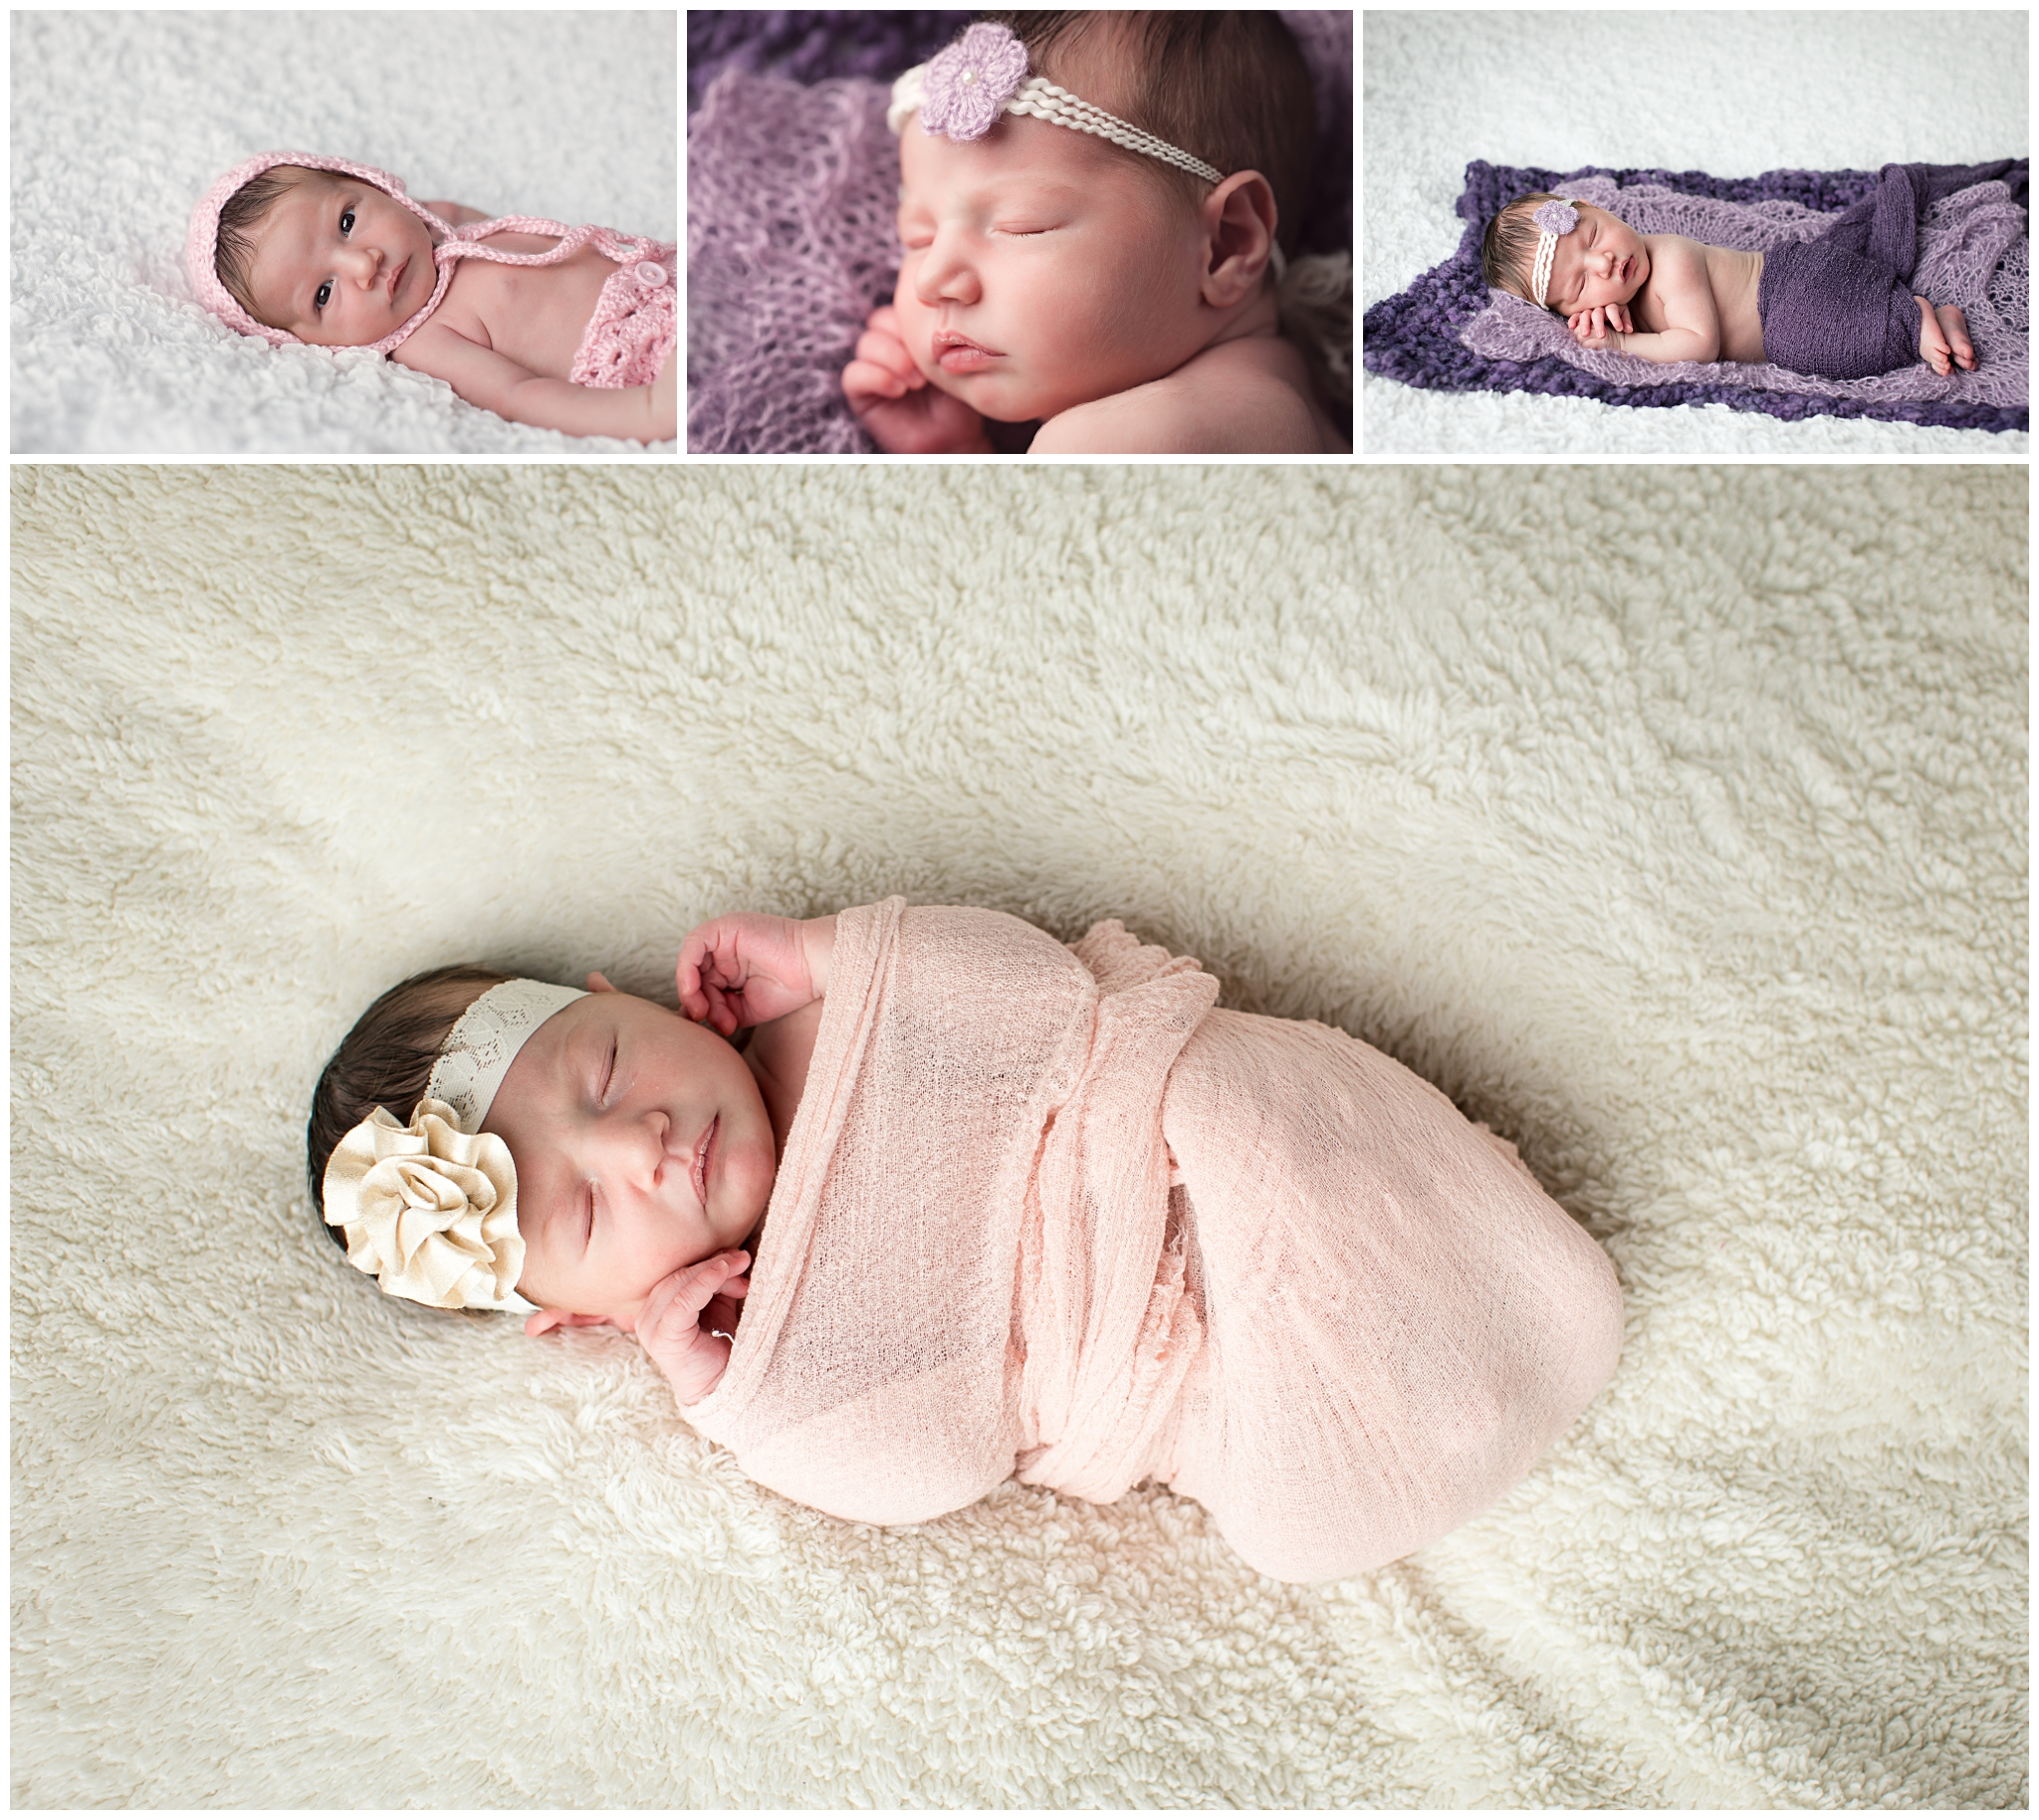 Berks County Reading PA Newborn Family Siblings Photography Photographer Photo